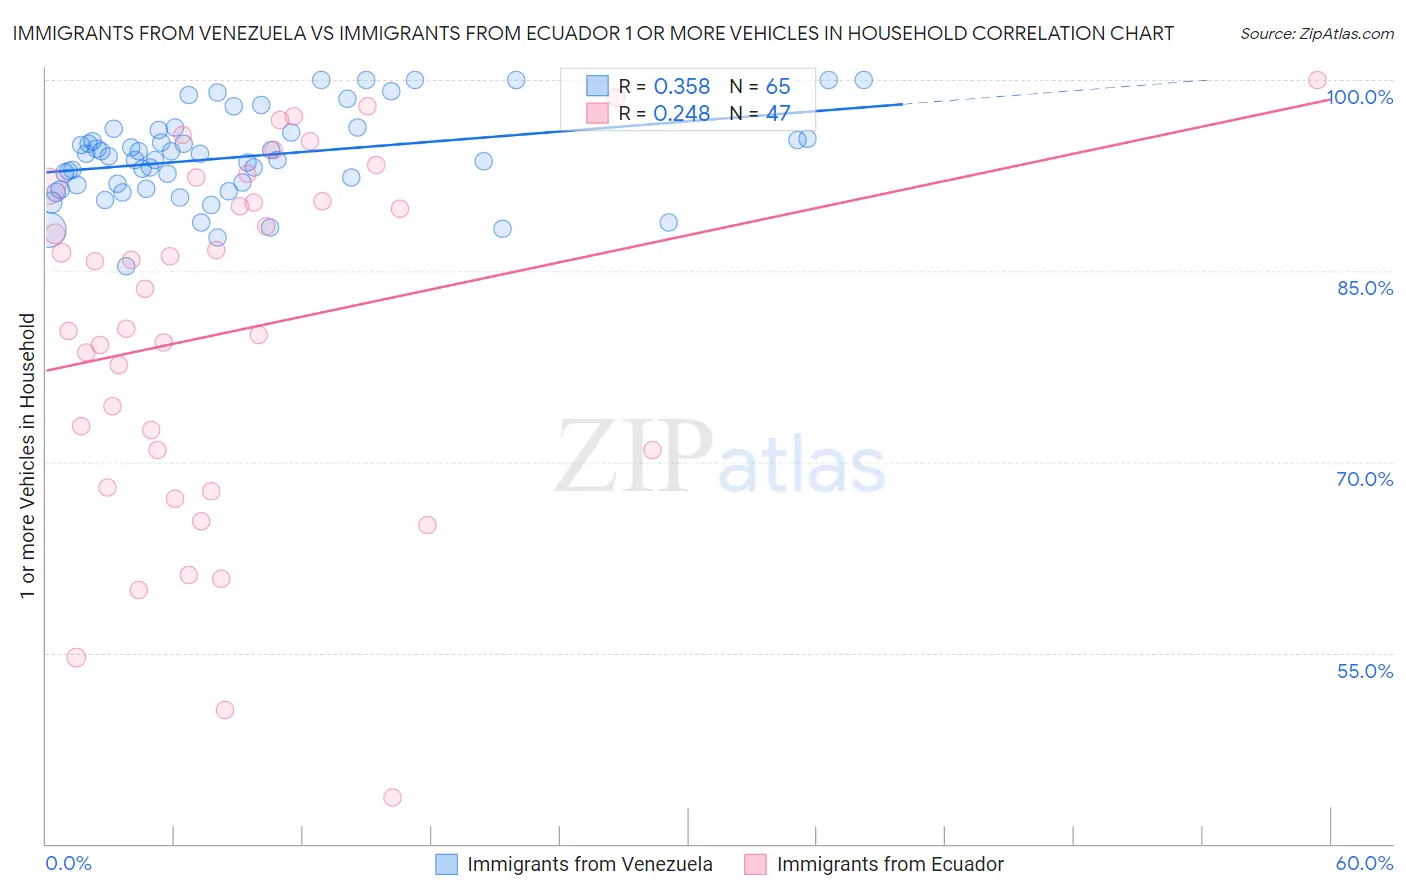 Immigrants from Venezuela vs Immigrants from Ecuador 1 or more Vehicles in Household